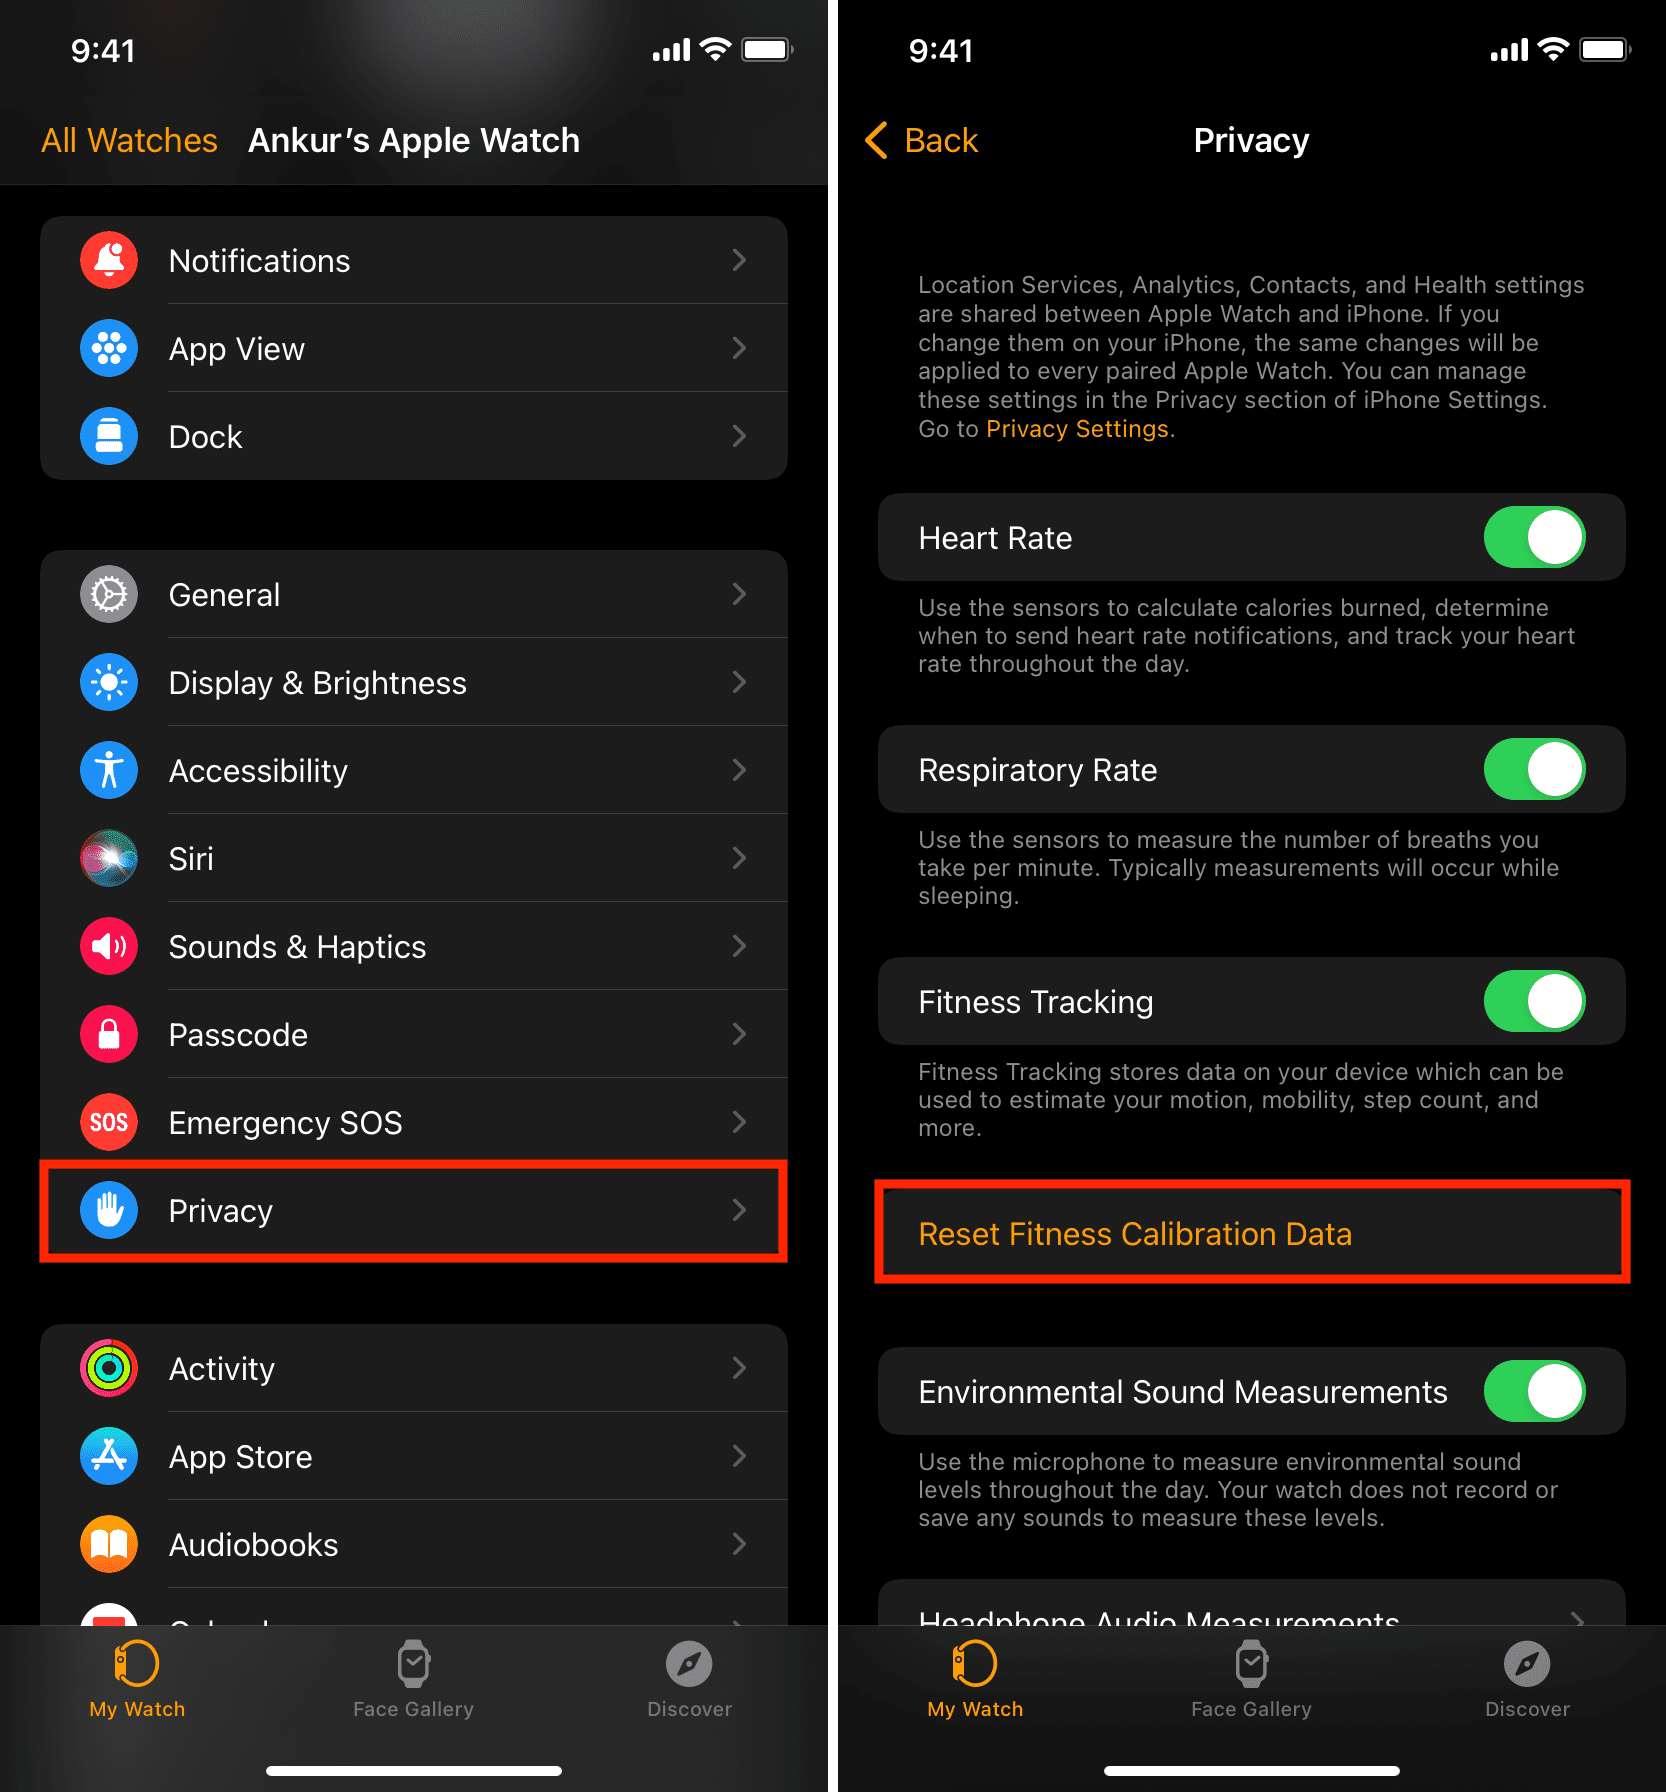 Reset Fitness Calibration Data for Apple Watch